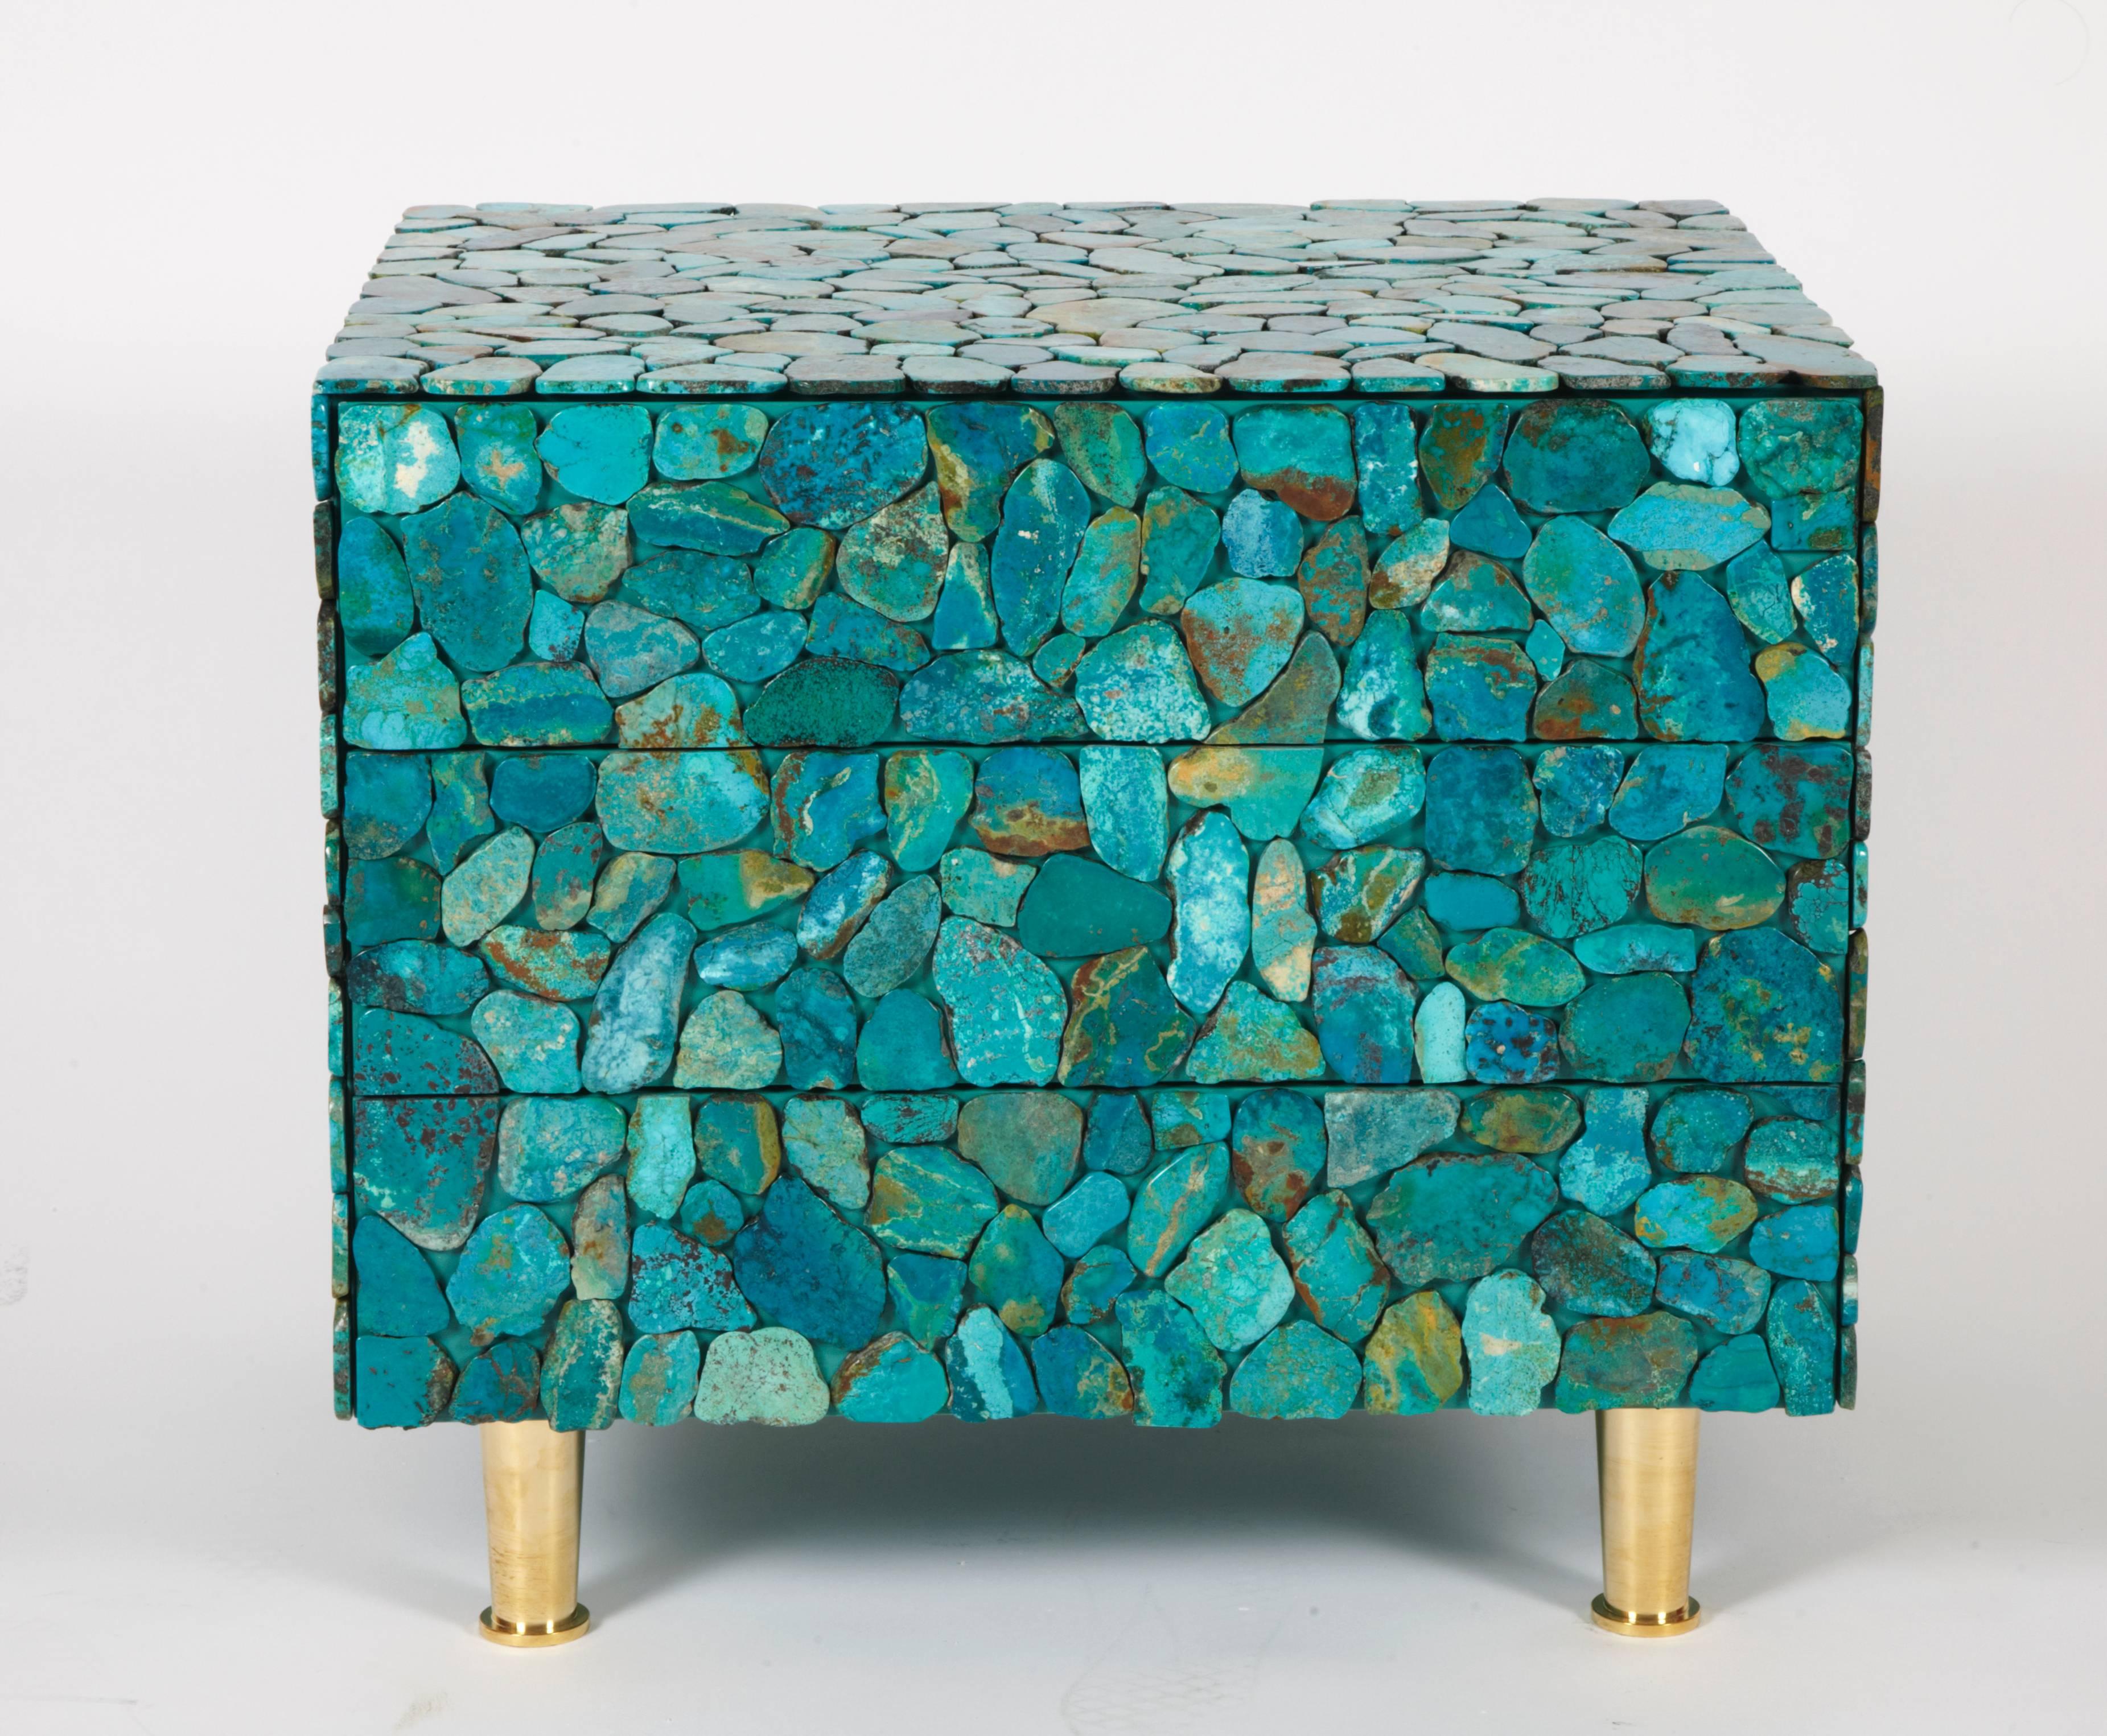 Pair of bedsides, 2014.
Beech wood, turquoise, brass.
Measures: H: 47 cm; W: 54 cm; D: 45 cm.
Stamped Kam Tin.
Limited edition.

Pair of bedsides in beechwood, lacquered and covered with turquoise. There are three drawers.
 